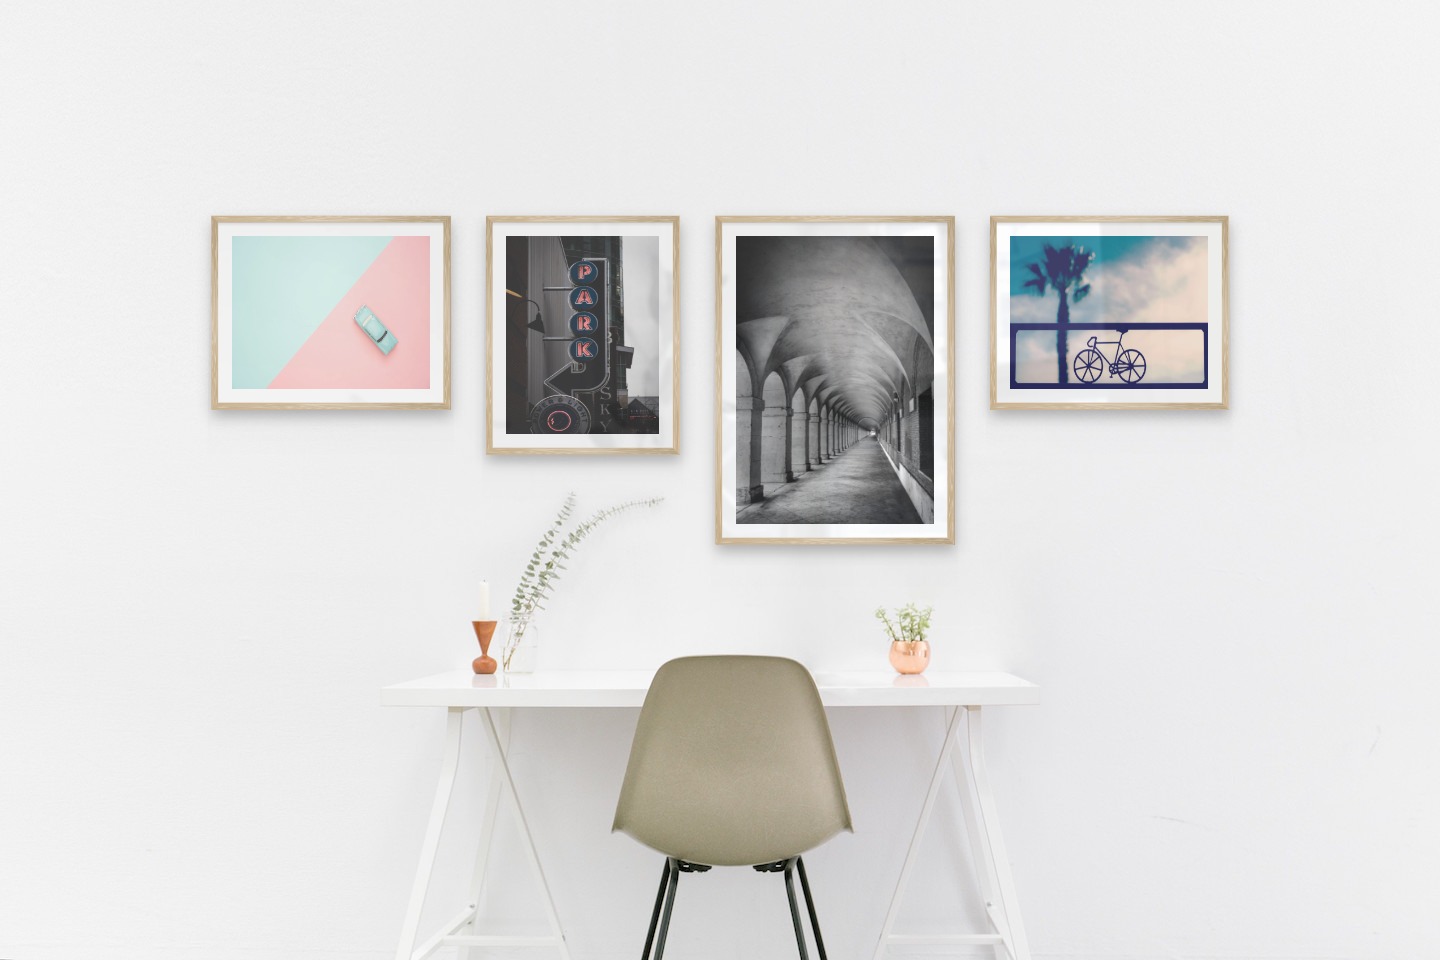 Gallery wall with picture frames in wood in sizes 40x50 and 50x70 with prints "Blue car and pink", "Sign "Park"", "Hallway with pillars and arches" and "Bicycle in front of sky"